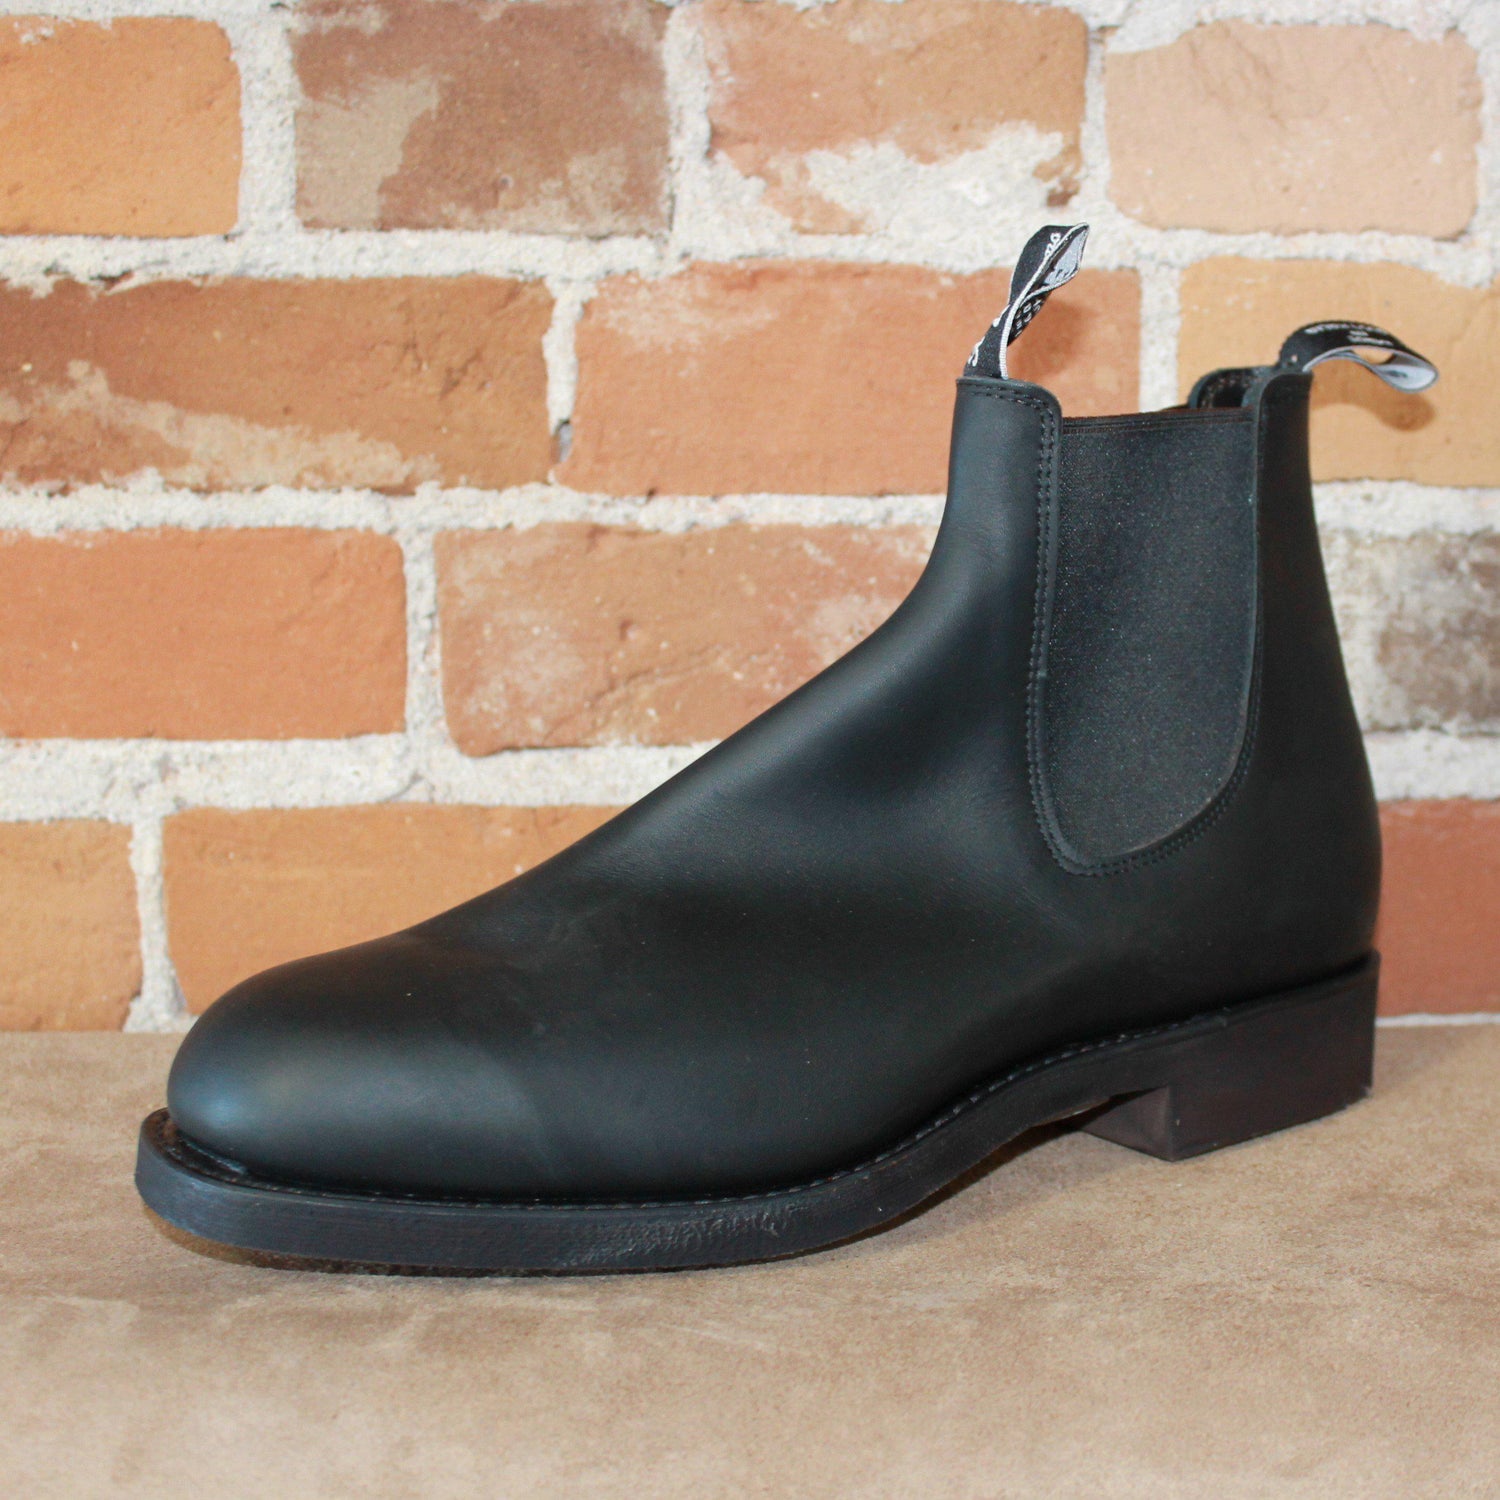 R.M. Williams Boots in Black  Mens boots fashion, Mens dress